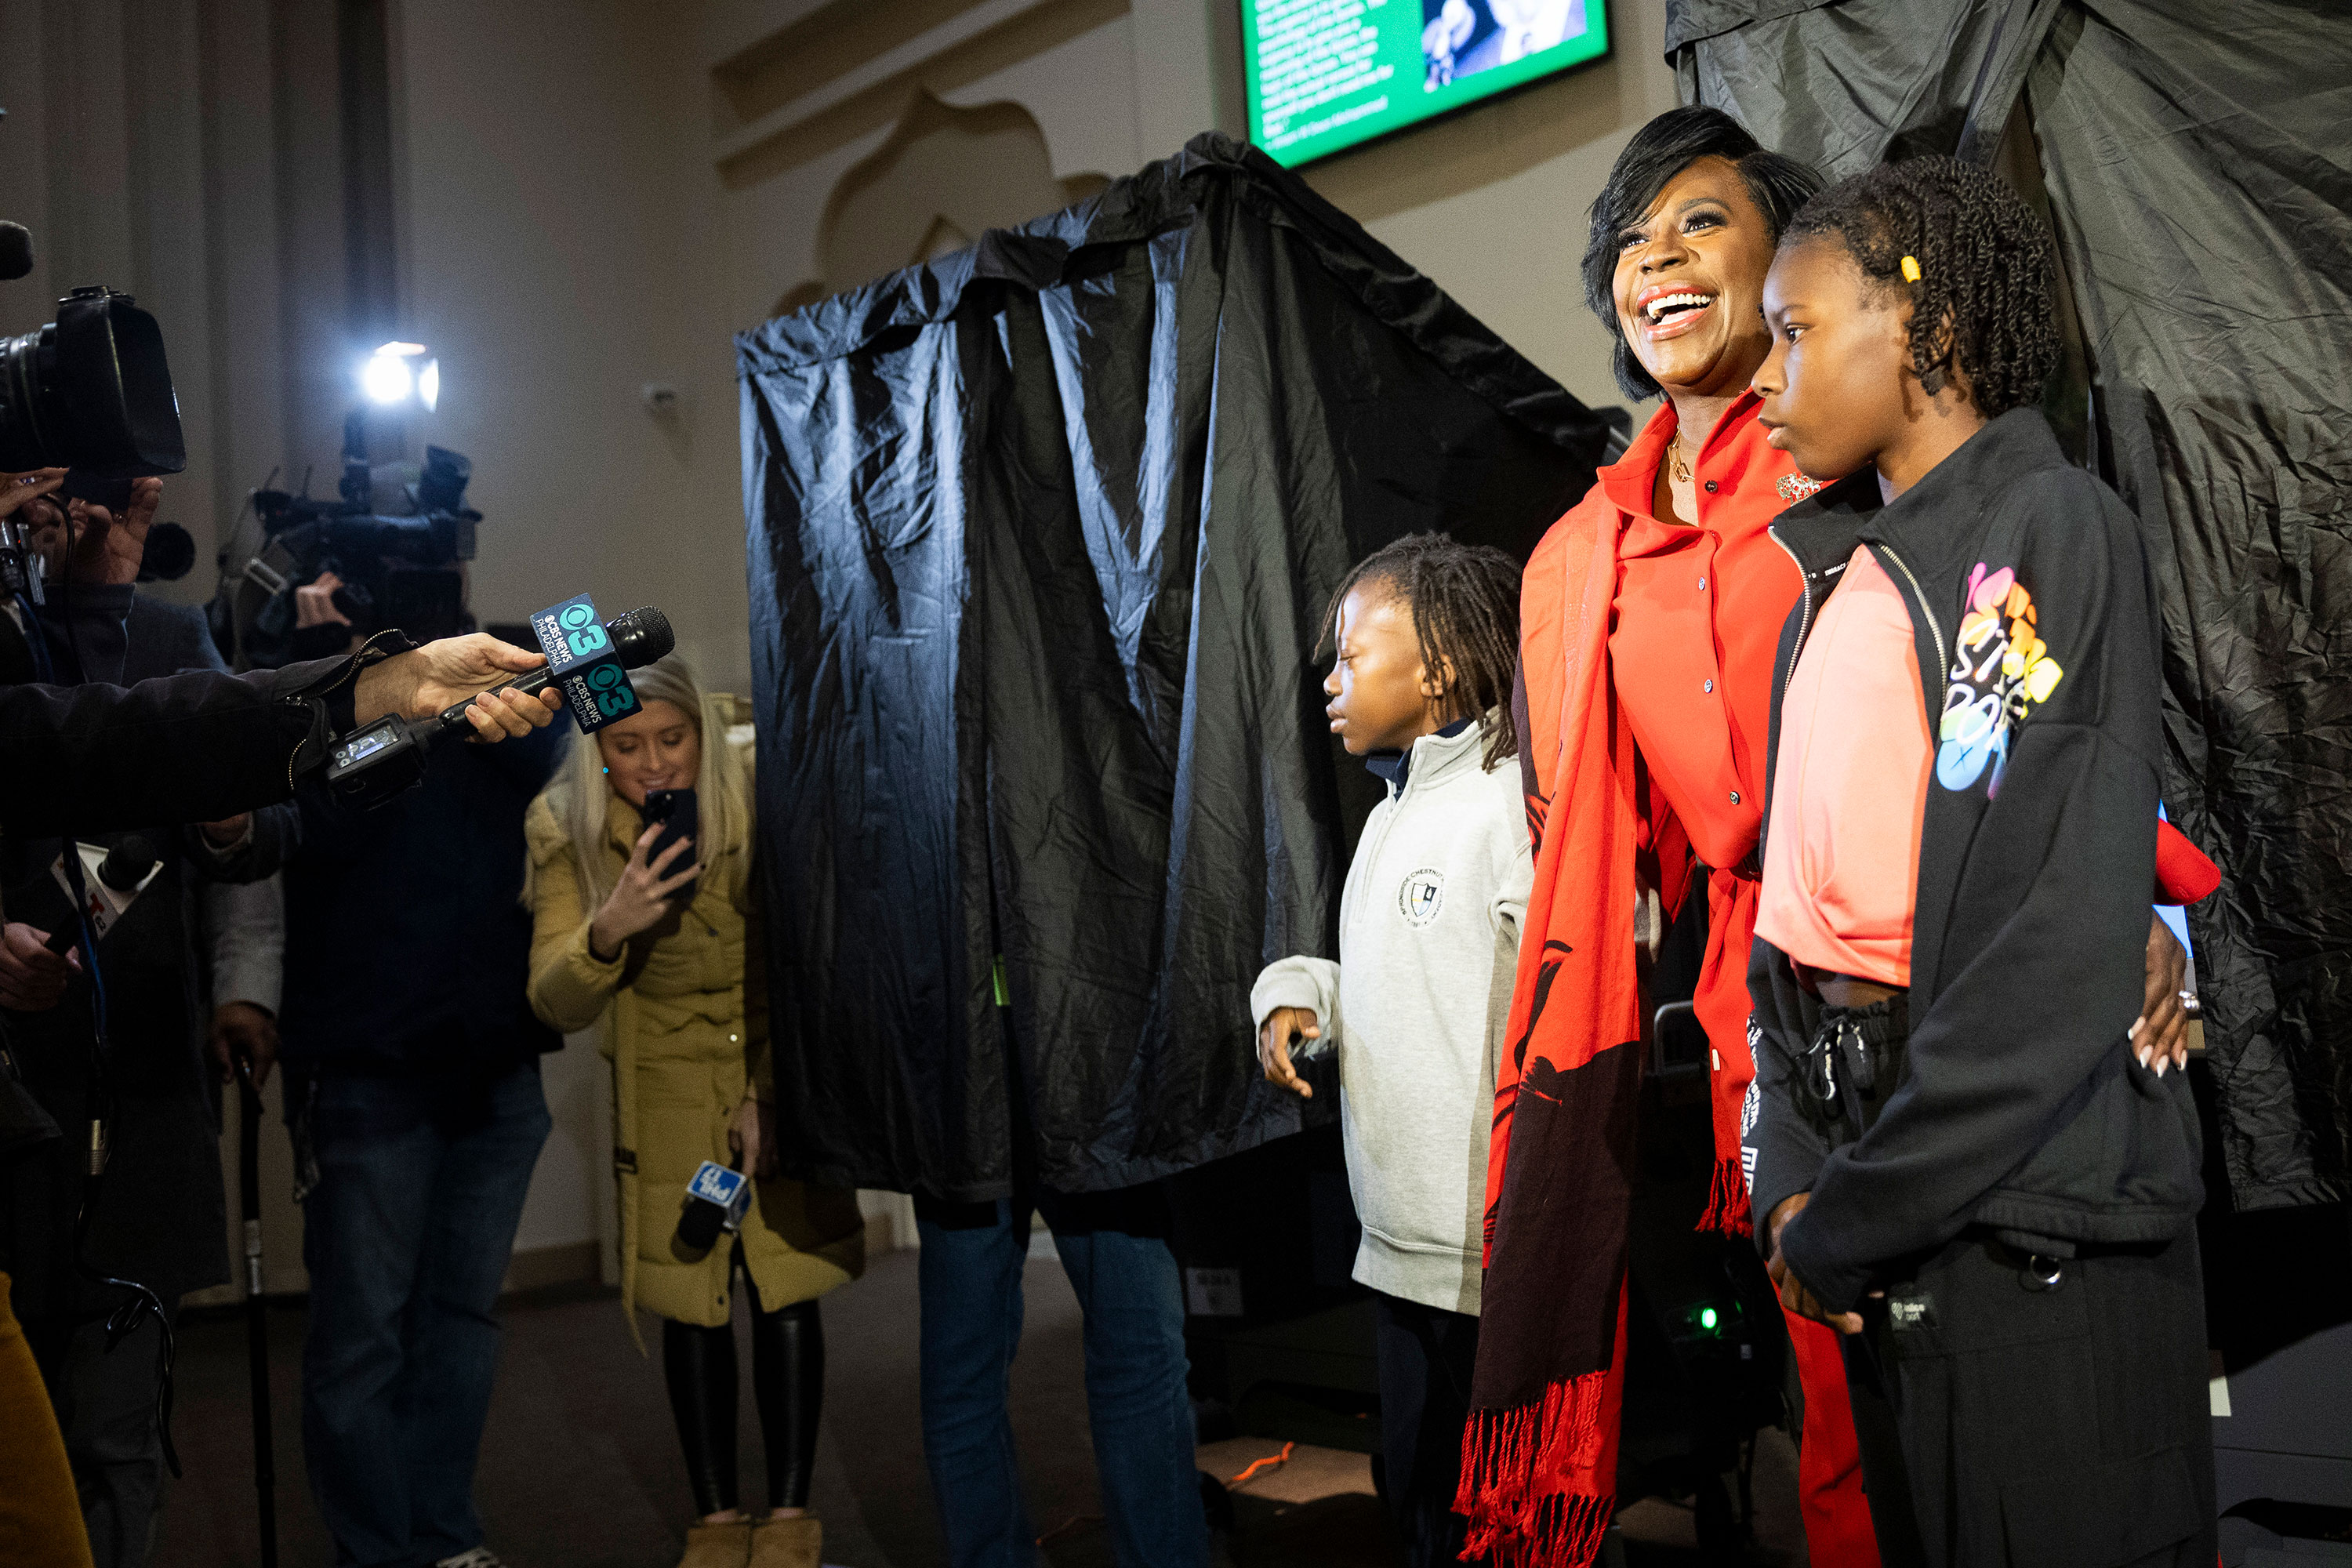 Democratic mayoral candidate Cherelle Parker poses for photos after casting a ballot in Philadelphia on Tuesday.